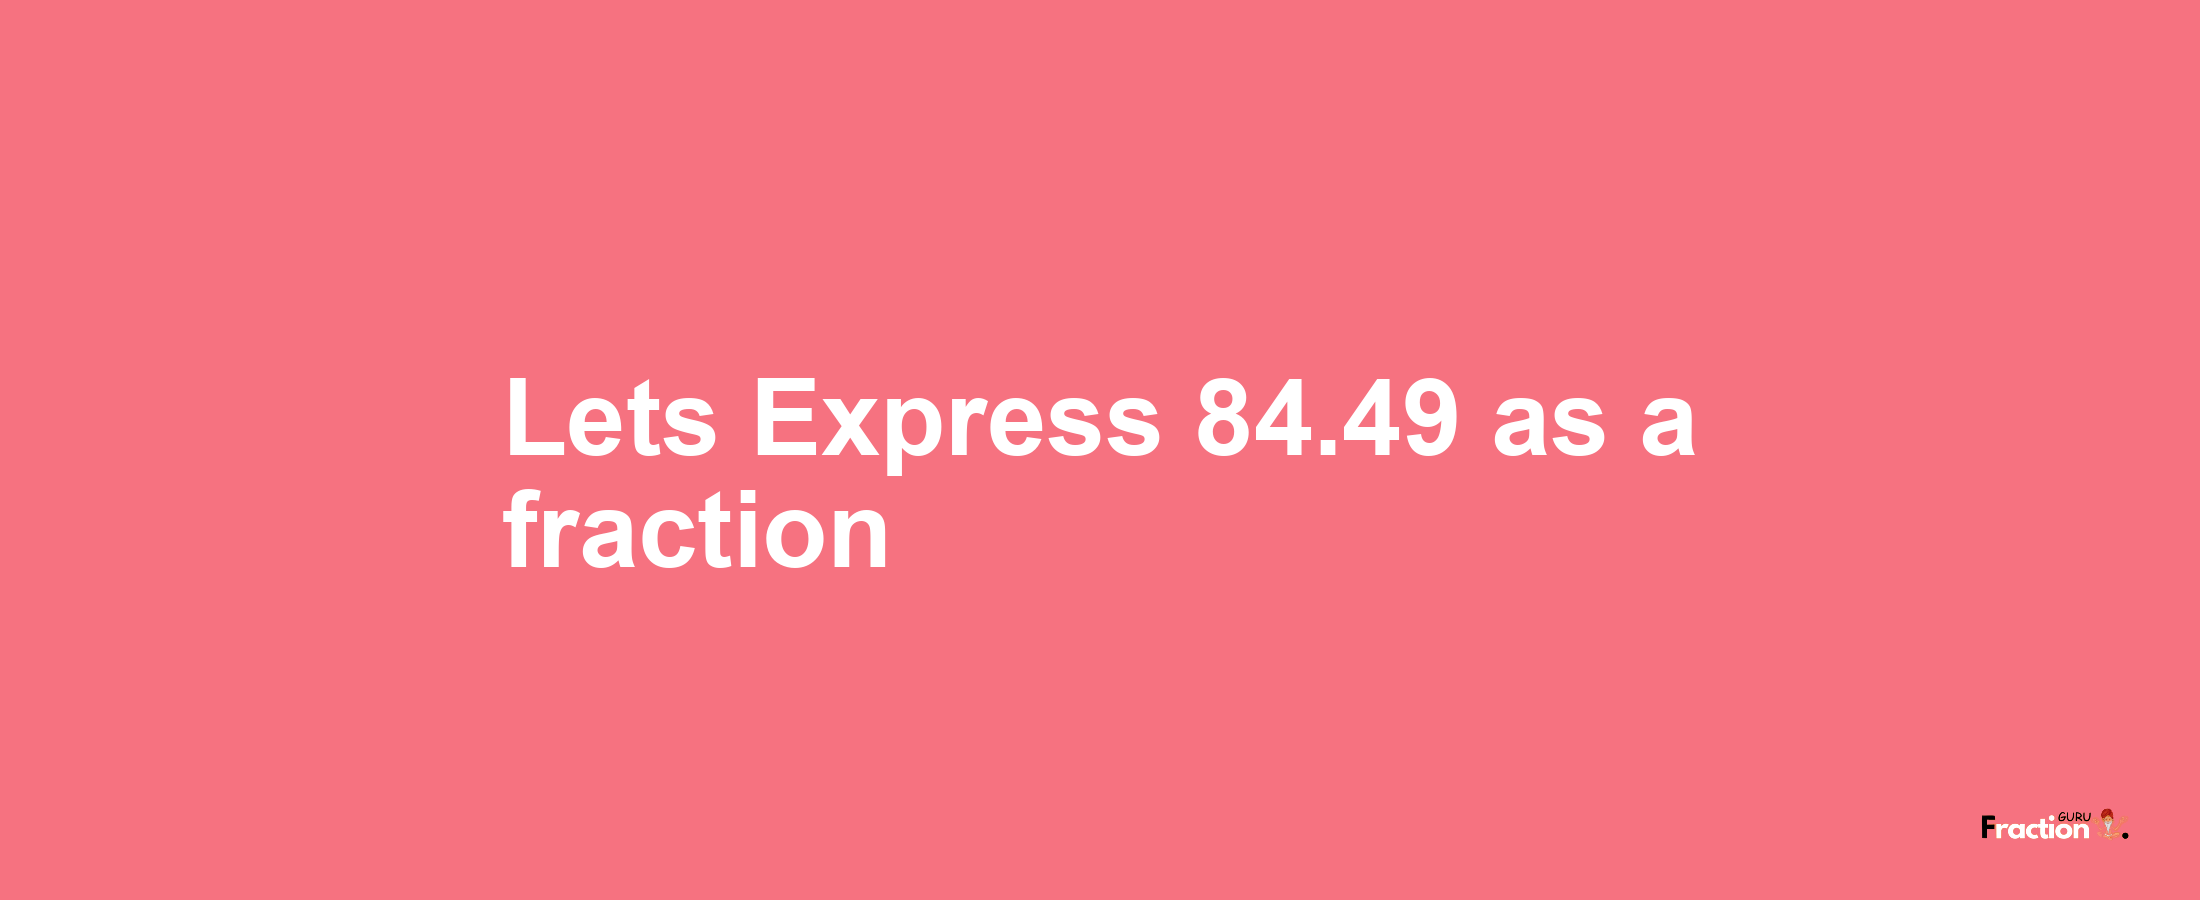 Lets Express 84.49 as afraction